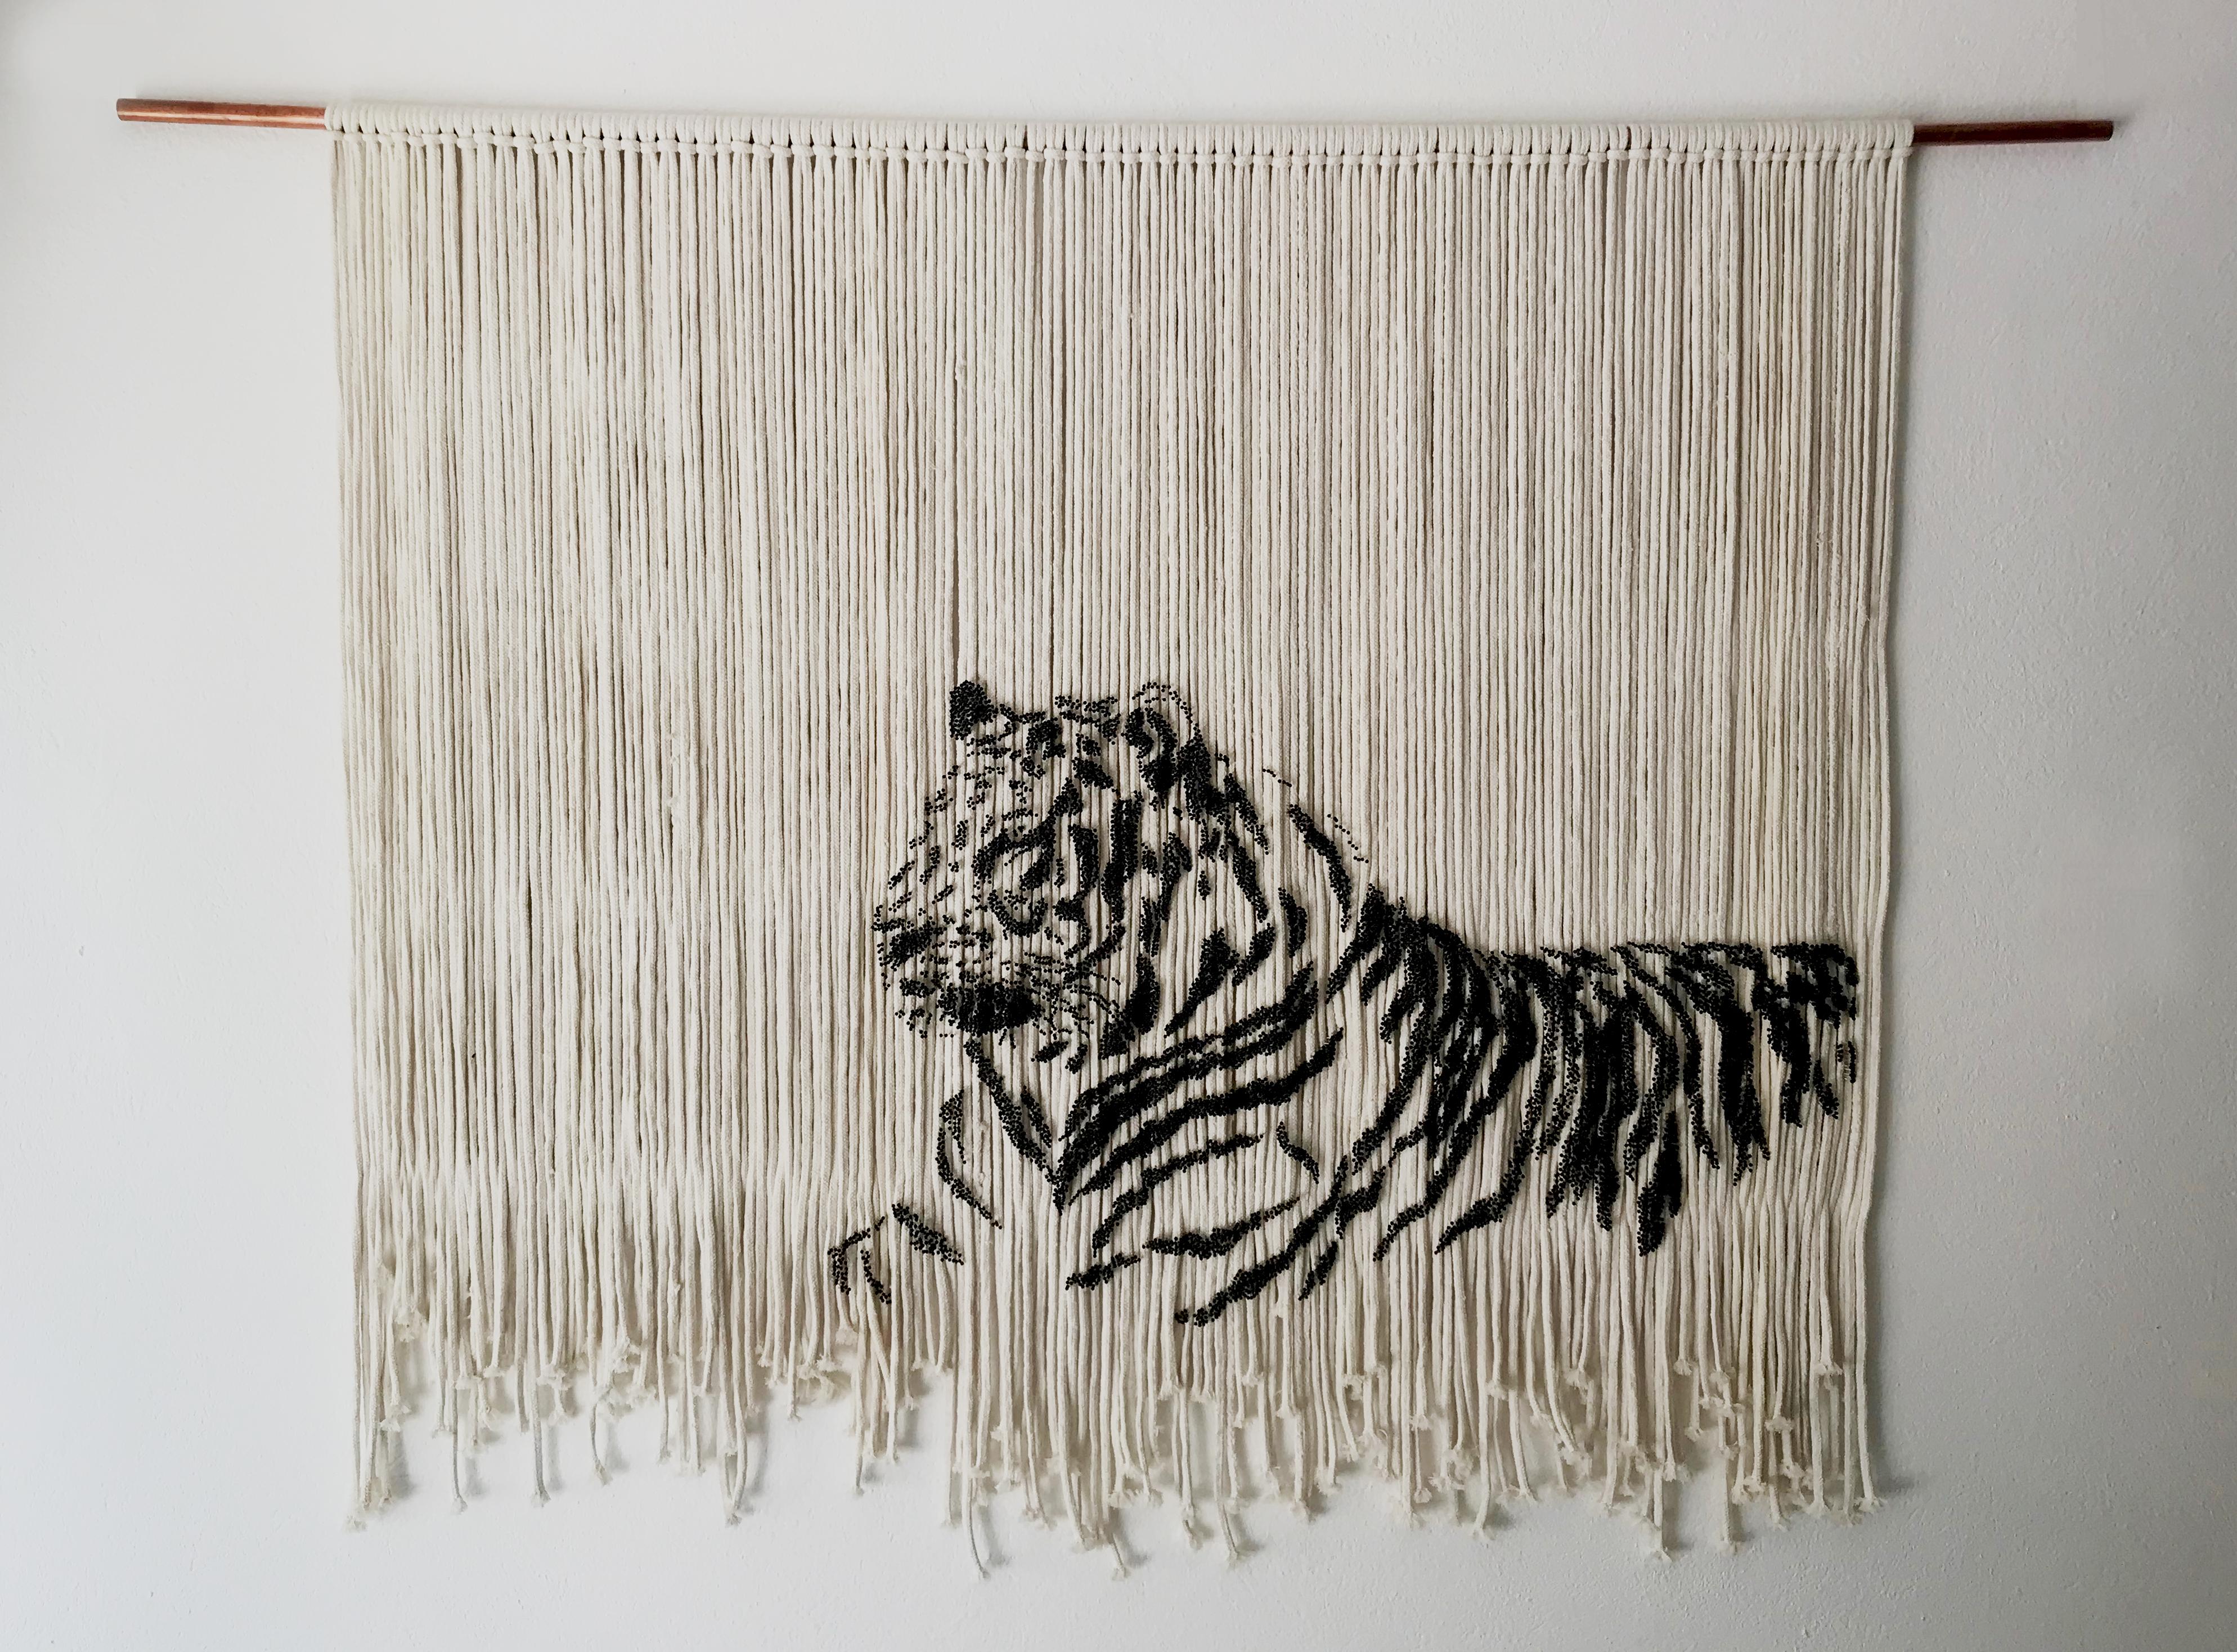 TIGER  Modern Animal Wall Art Sculpture For Hanging on Walls or Cieling - Painting by Arozarena De La Fuente